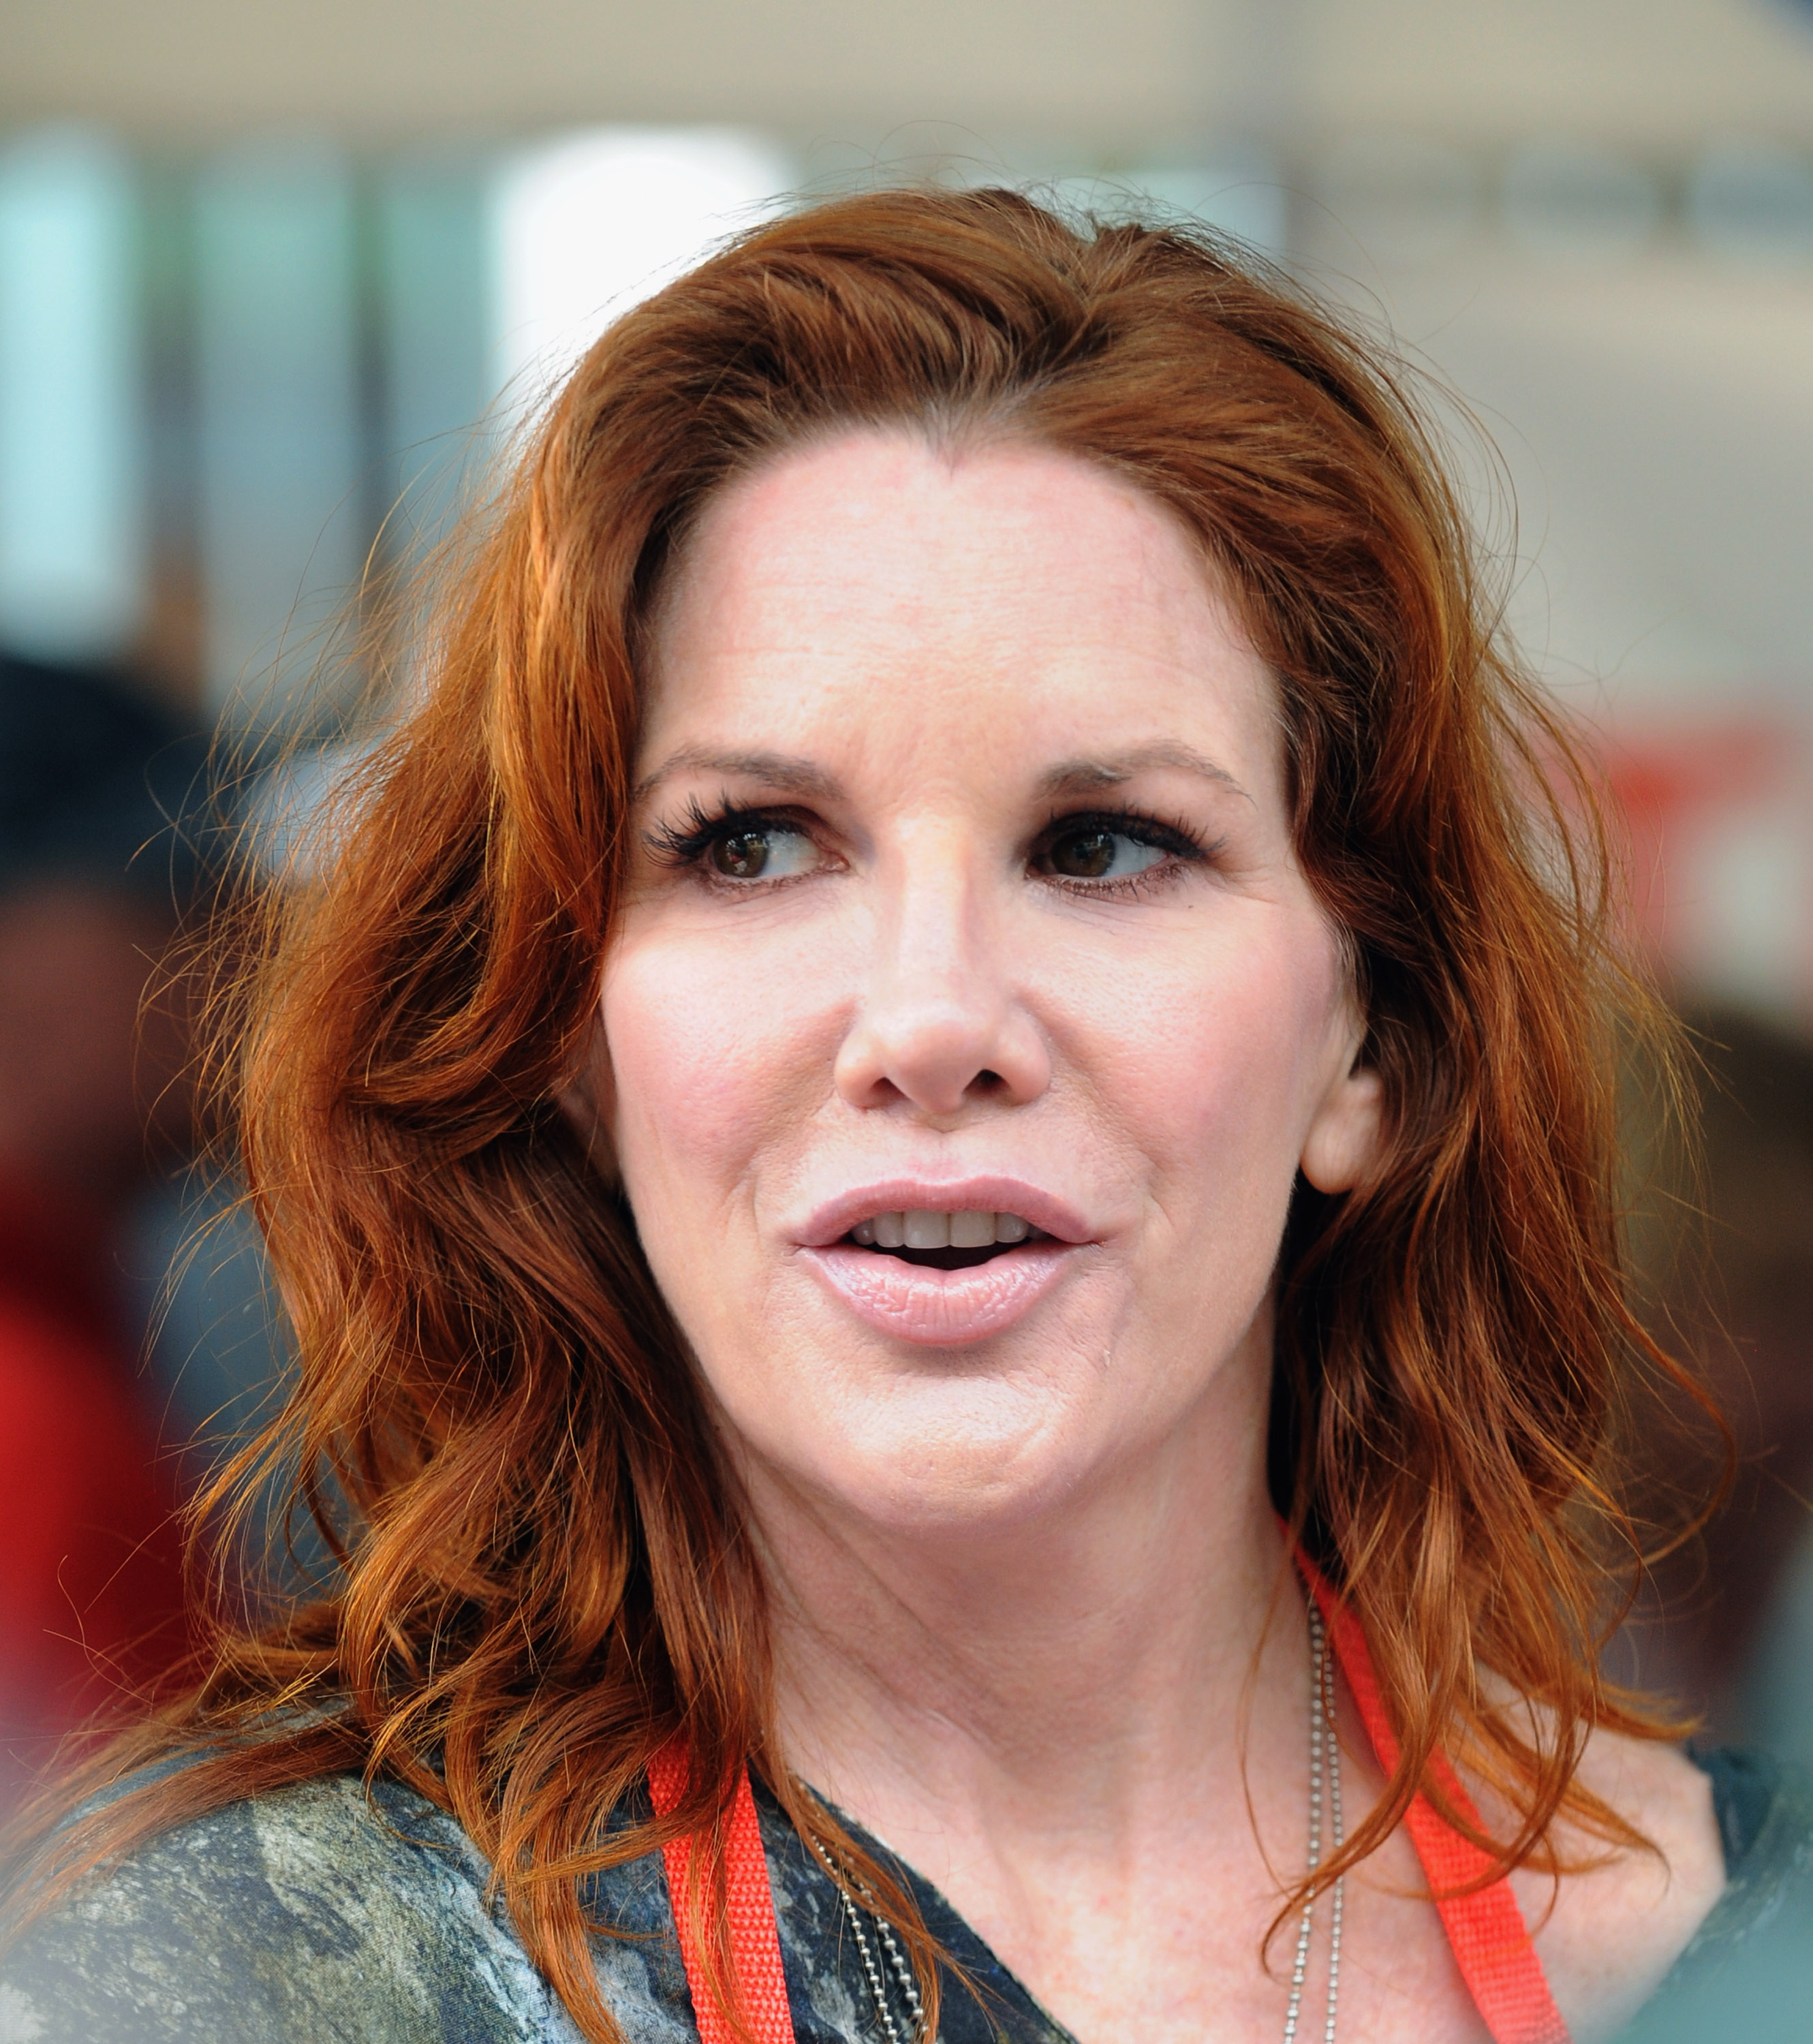 Melissa Gilbert serves food during the Los Angeles Mission Christmas Eve meal for the homeless at Los Angeles Mission on December 24, 2012 in Los Angeles, California | Source: Getty Images